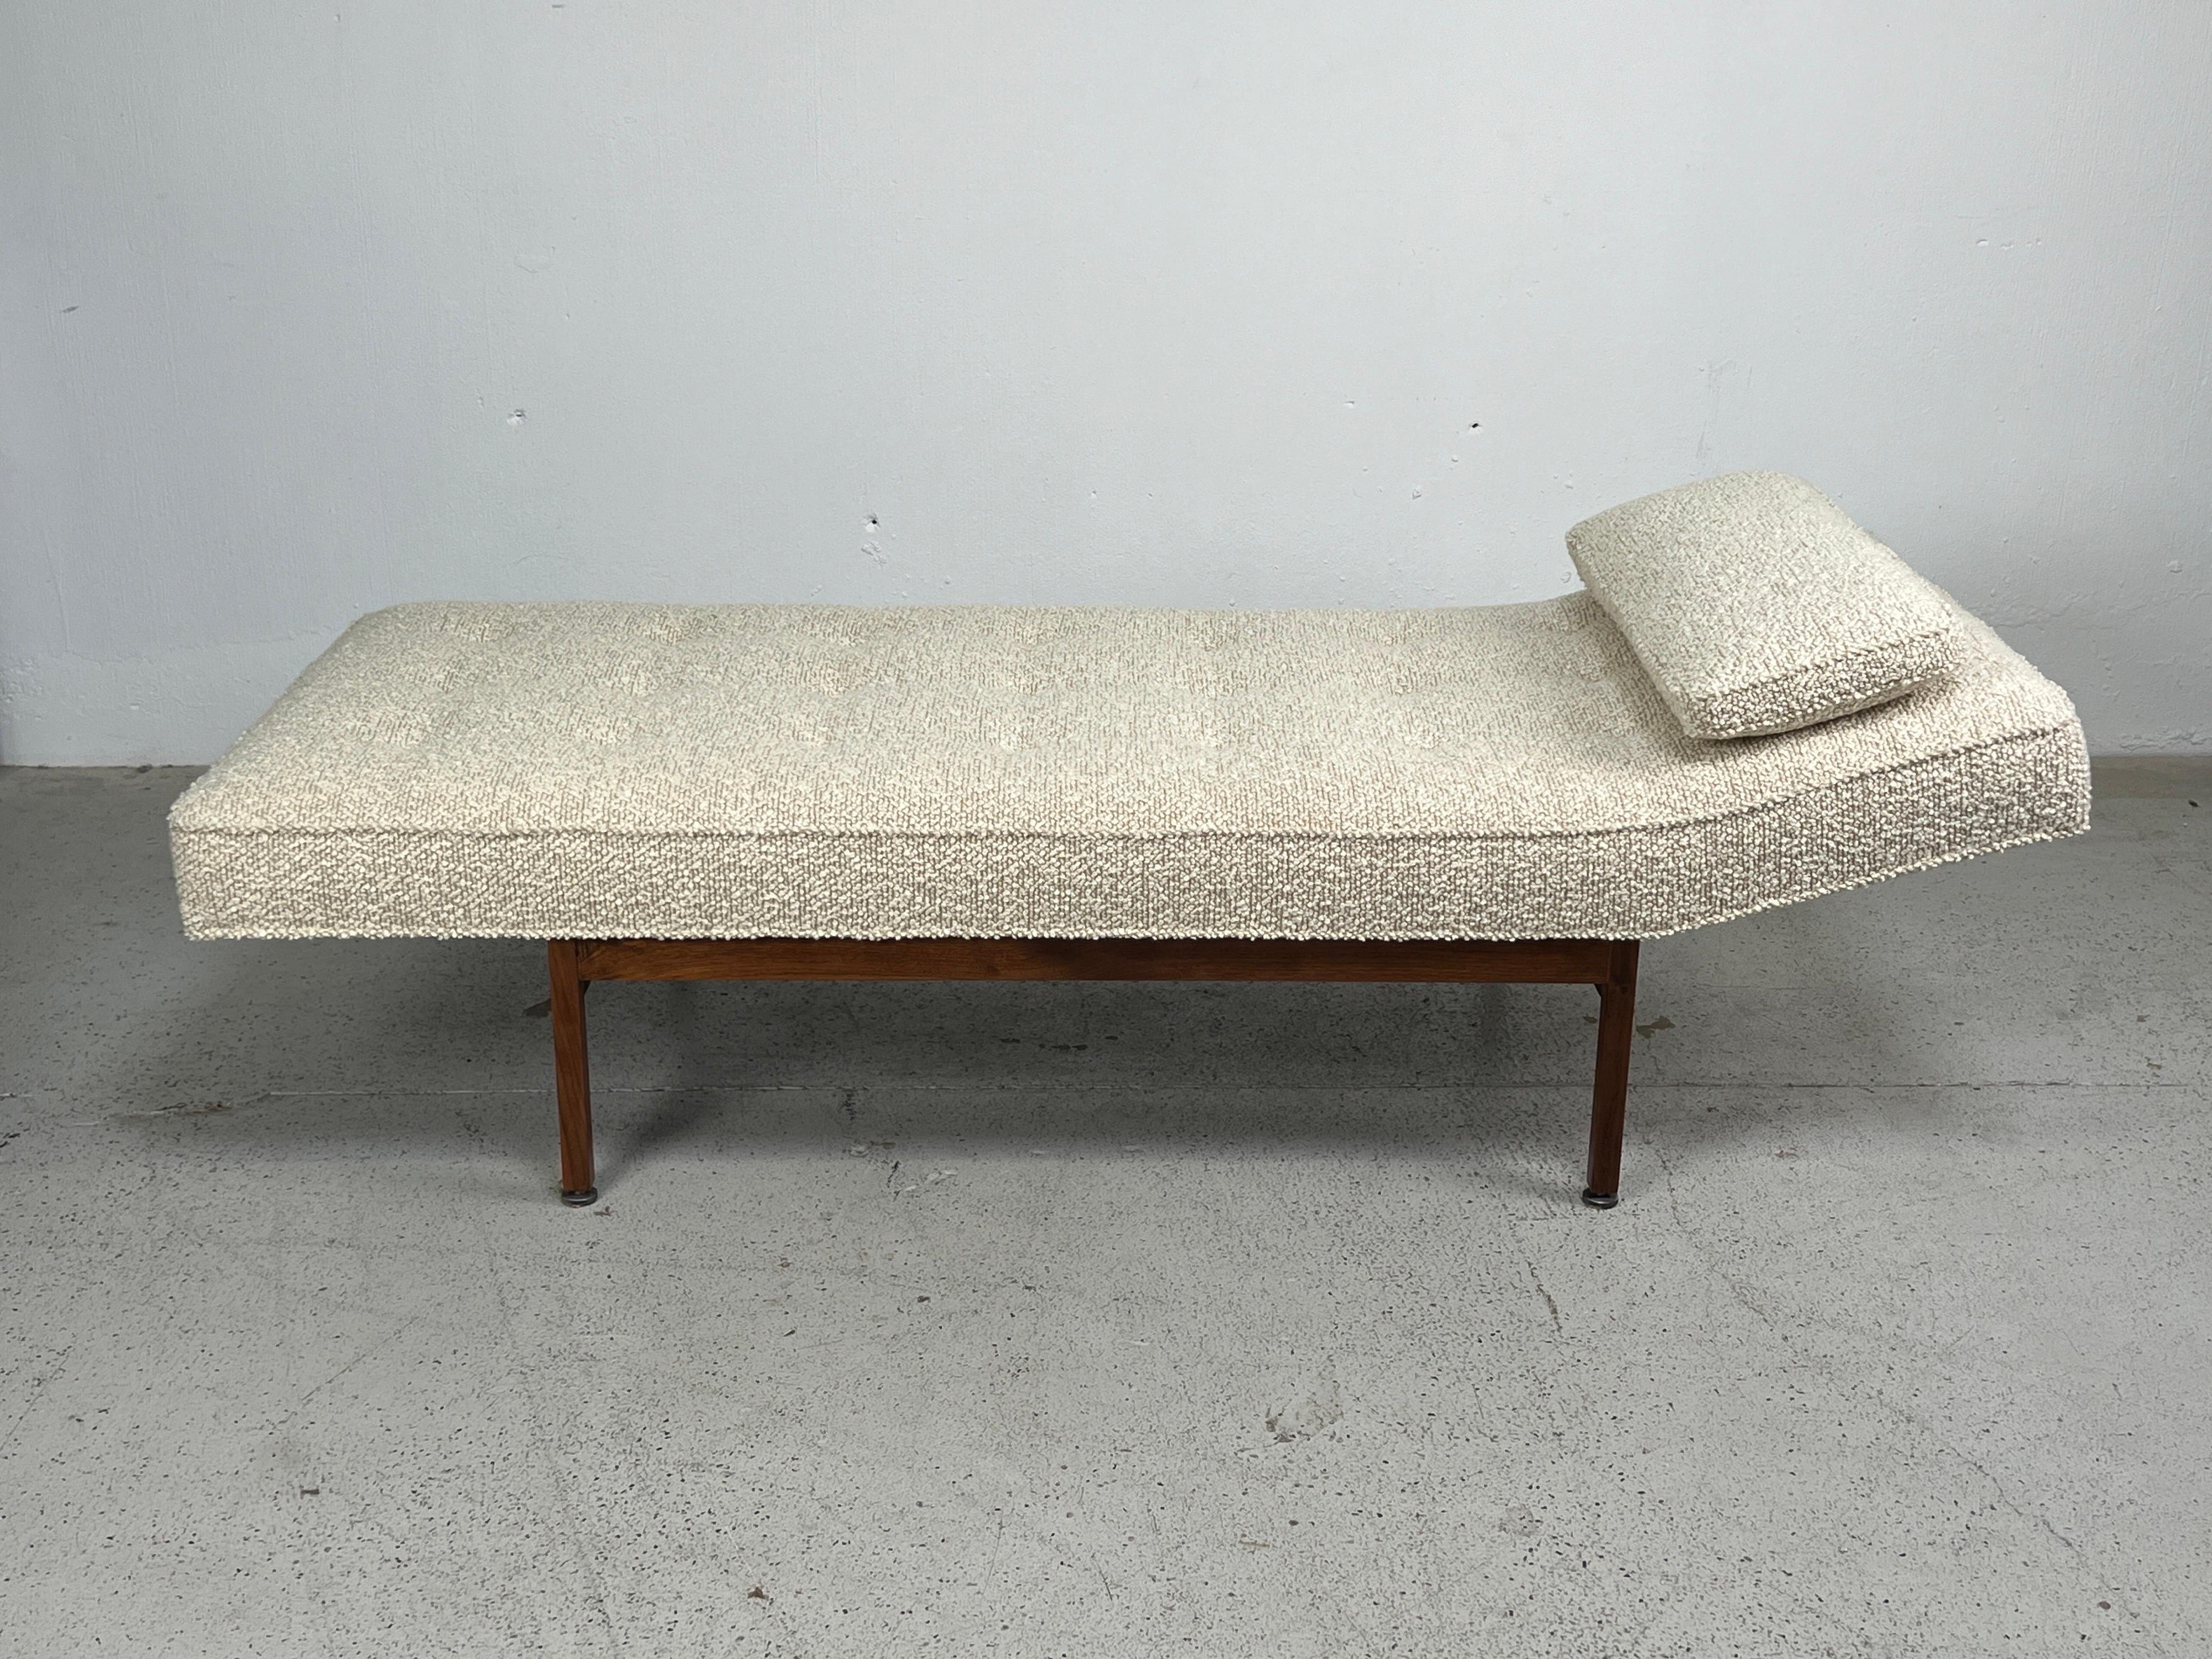 A Jens Risom daybed with walnut frame and steel glides. Fully restored. 